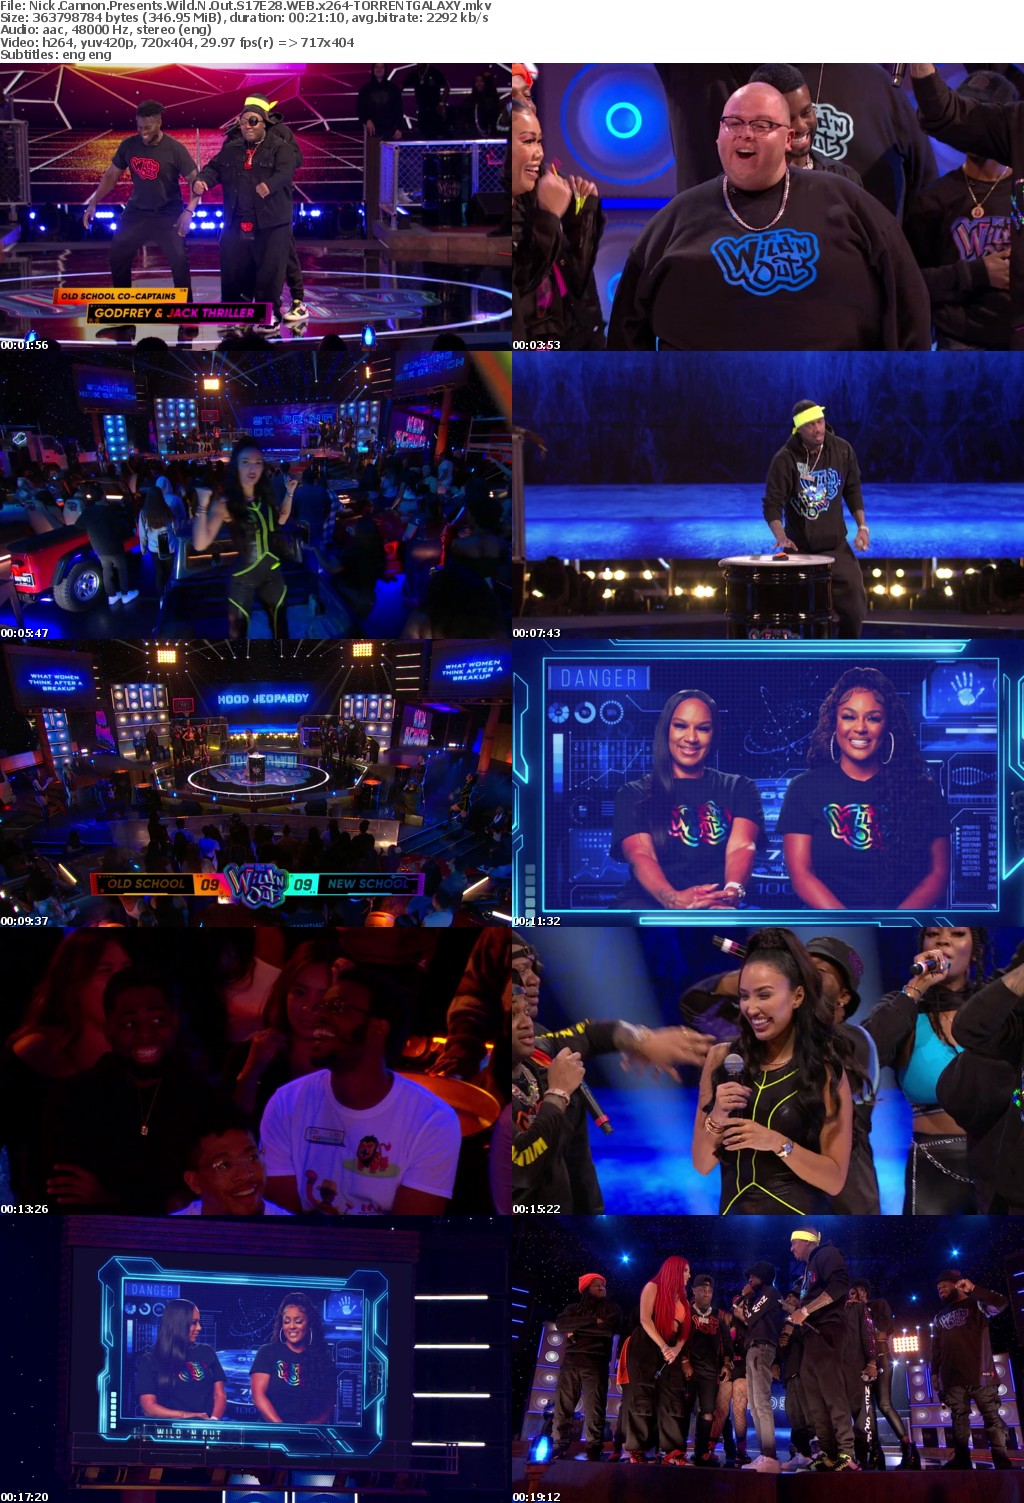 Nick Cannon Presents Wild N Out S17E28 WEB x264-GALAXY